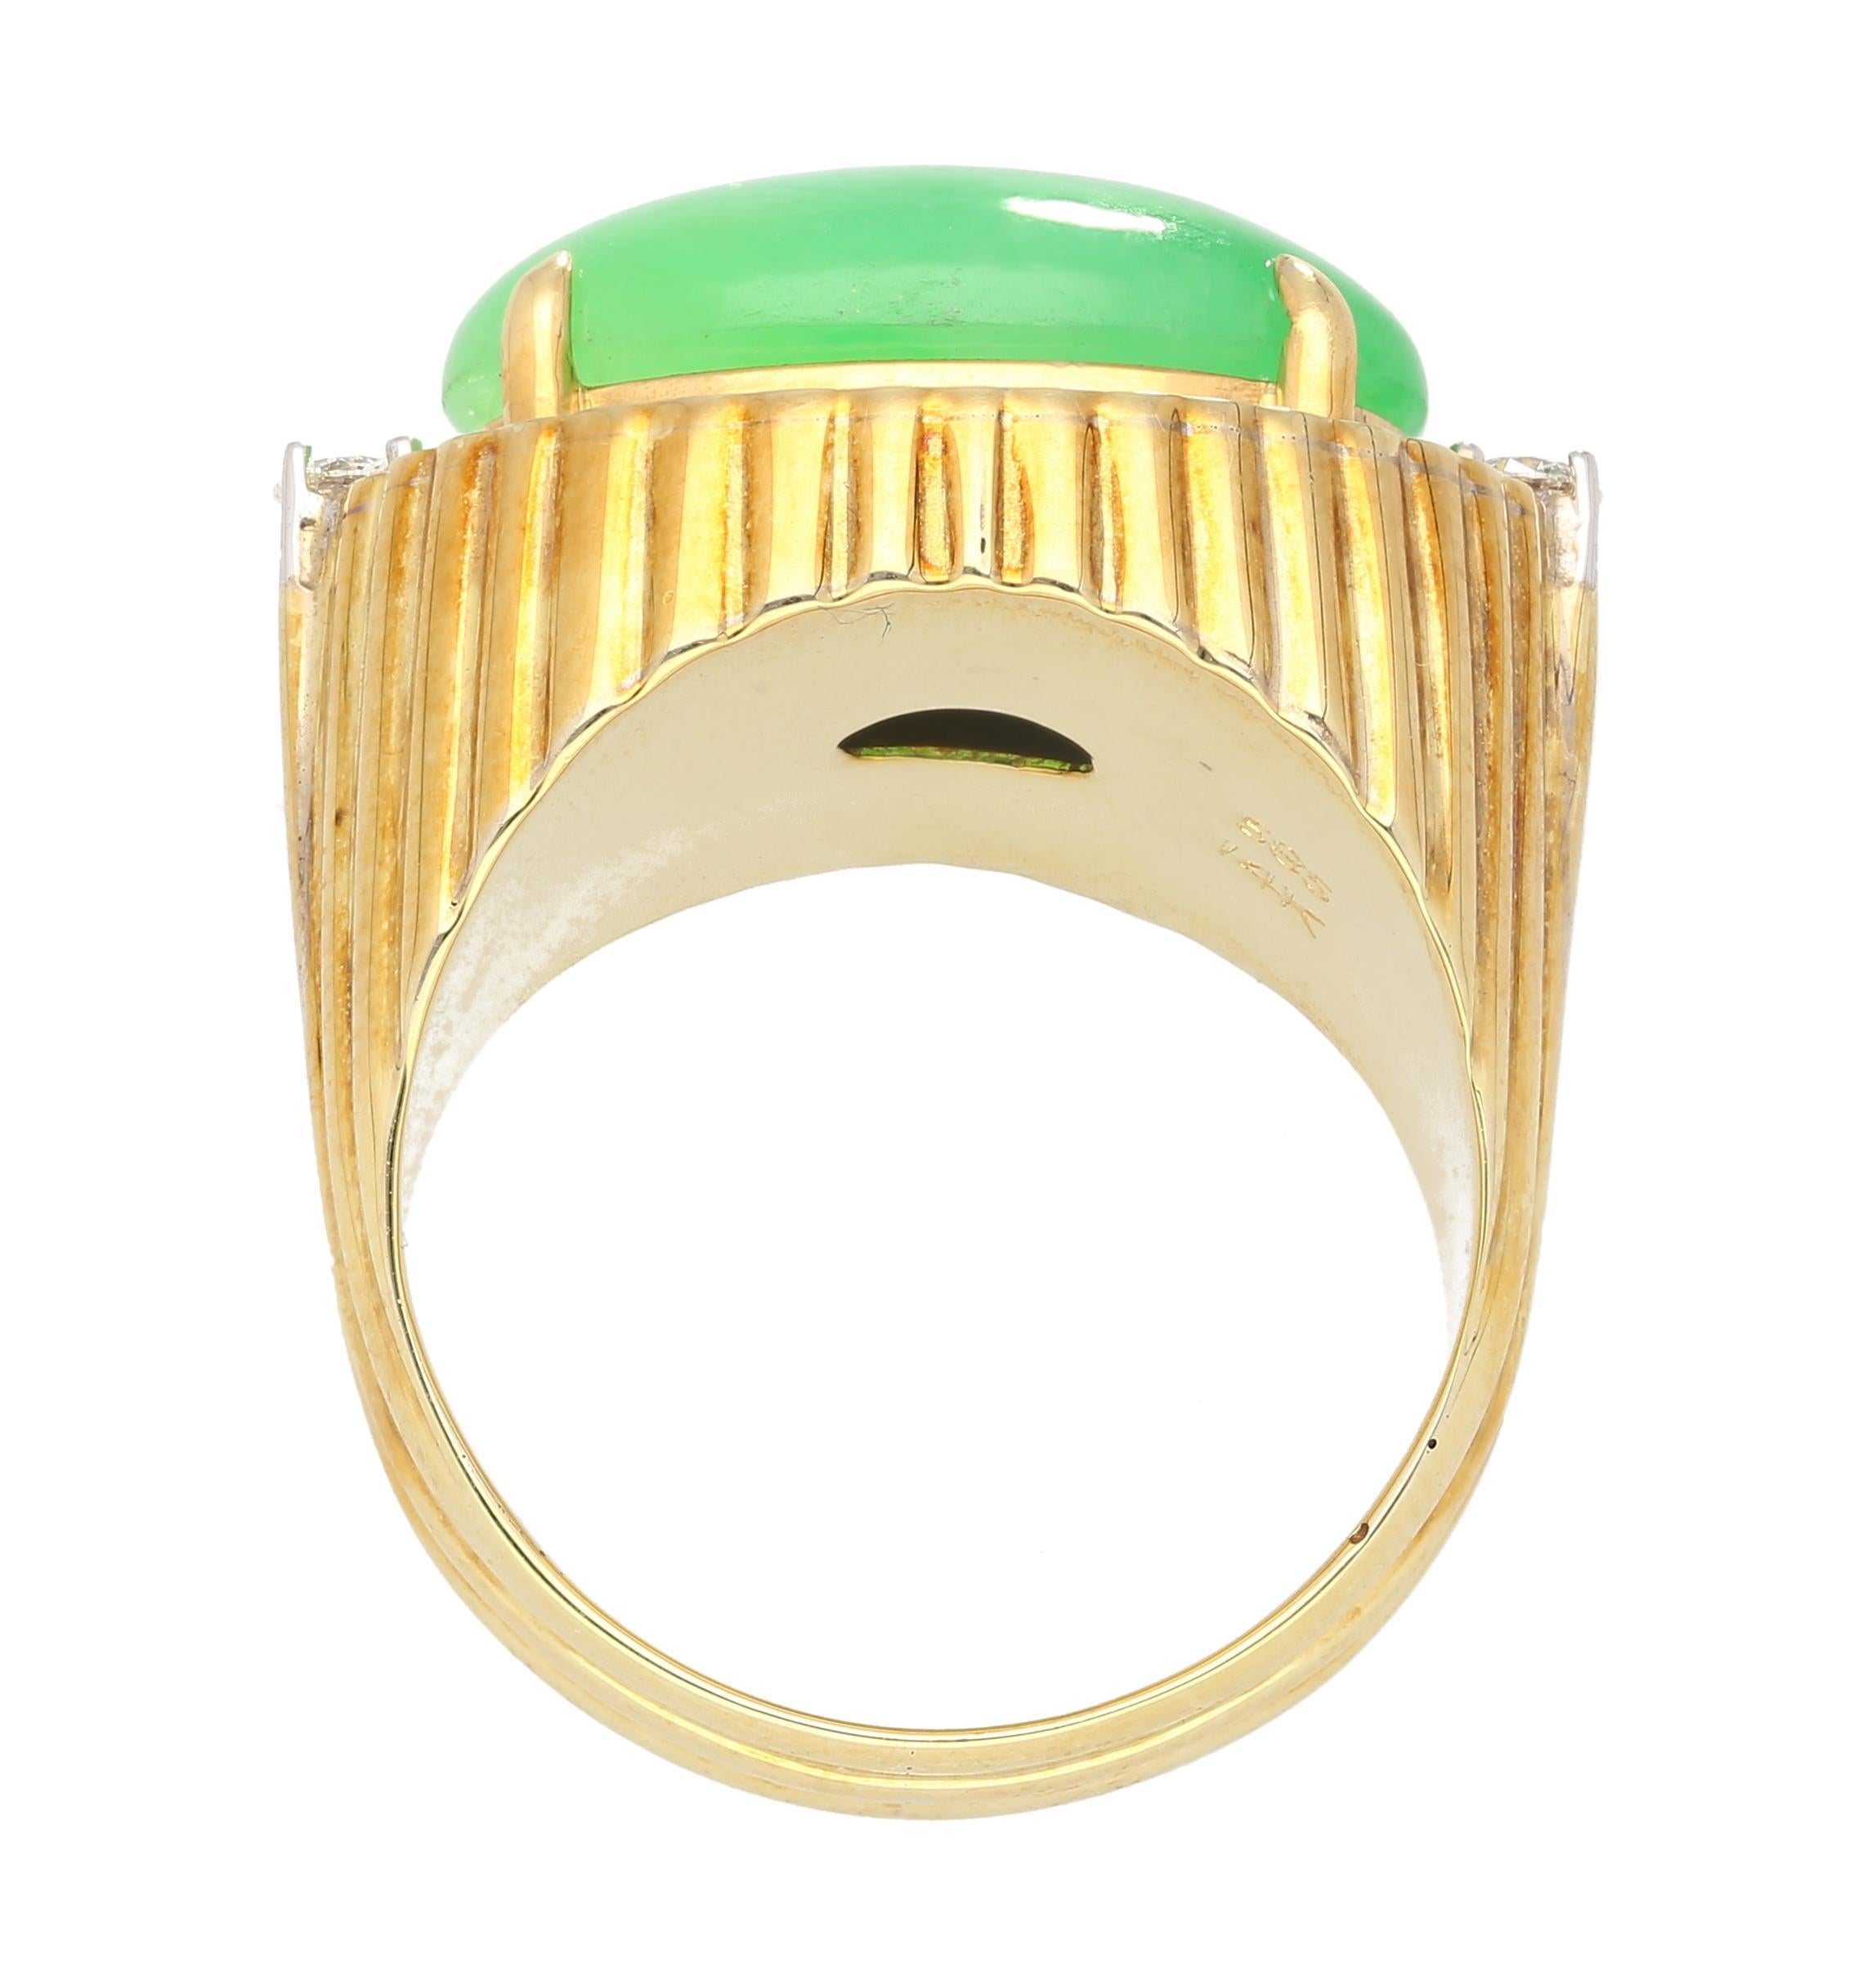 Oval cabochon cut 9.40 carat green Fei Cui Jadeite Jade ring. Grade A untreated jade with excellent color and luster. Adorned with 2 round cut diamonds of 0.15 carats total. Featuring a textured gold line ring shank. Ideal as a mens pinky or ladies